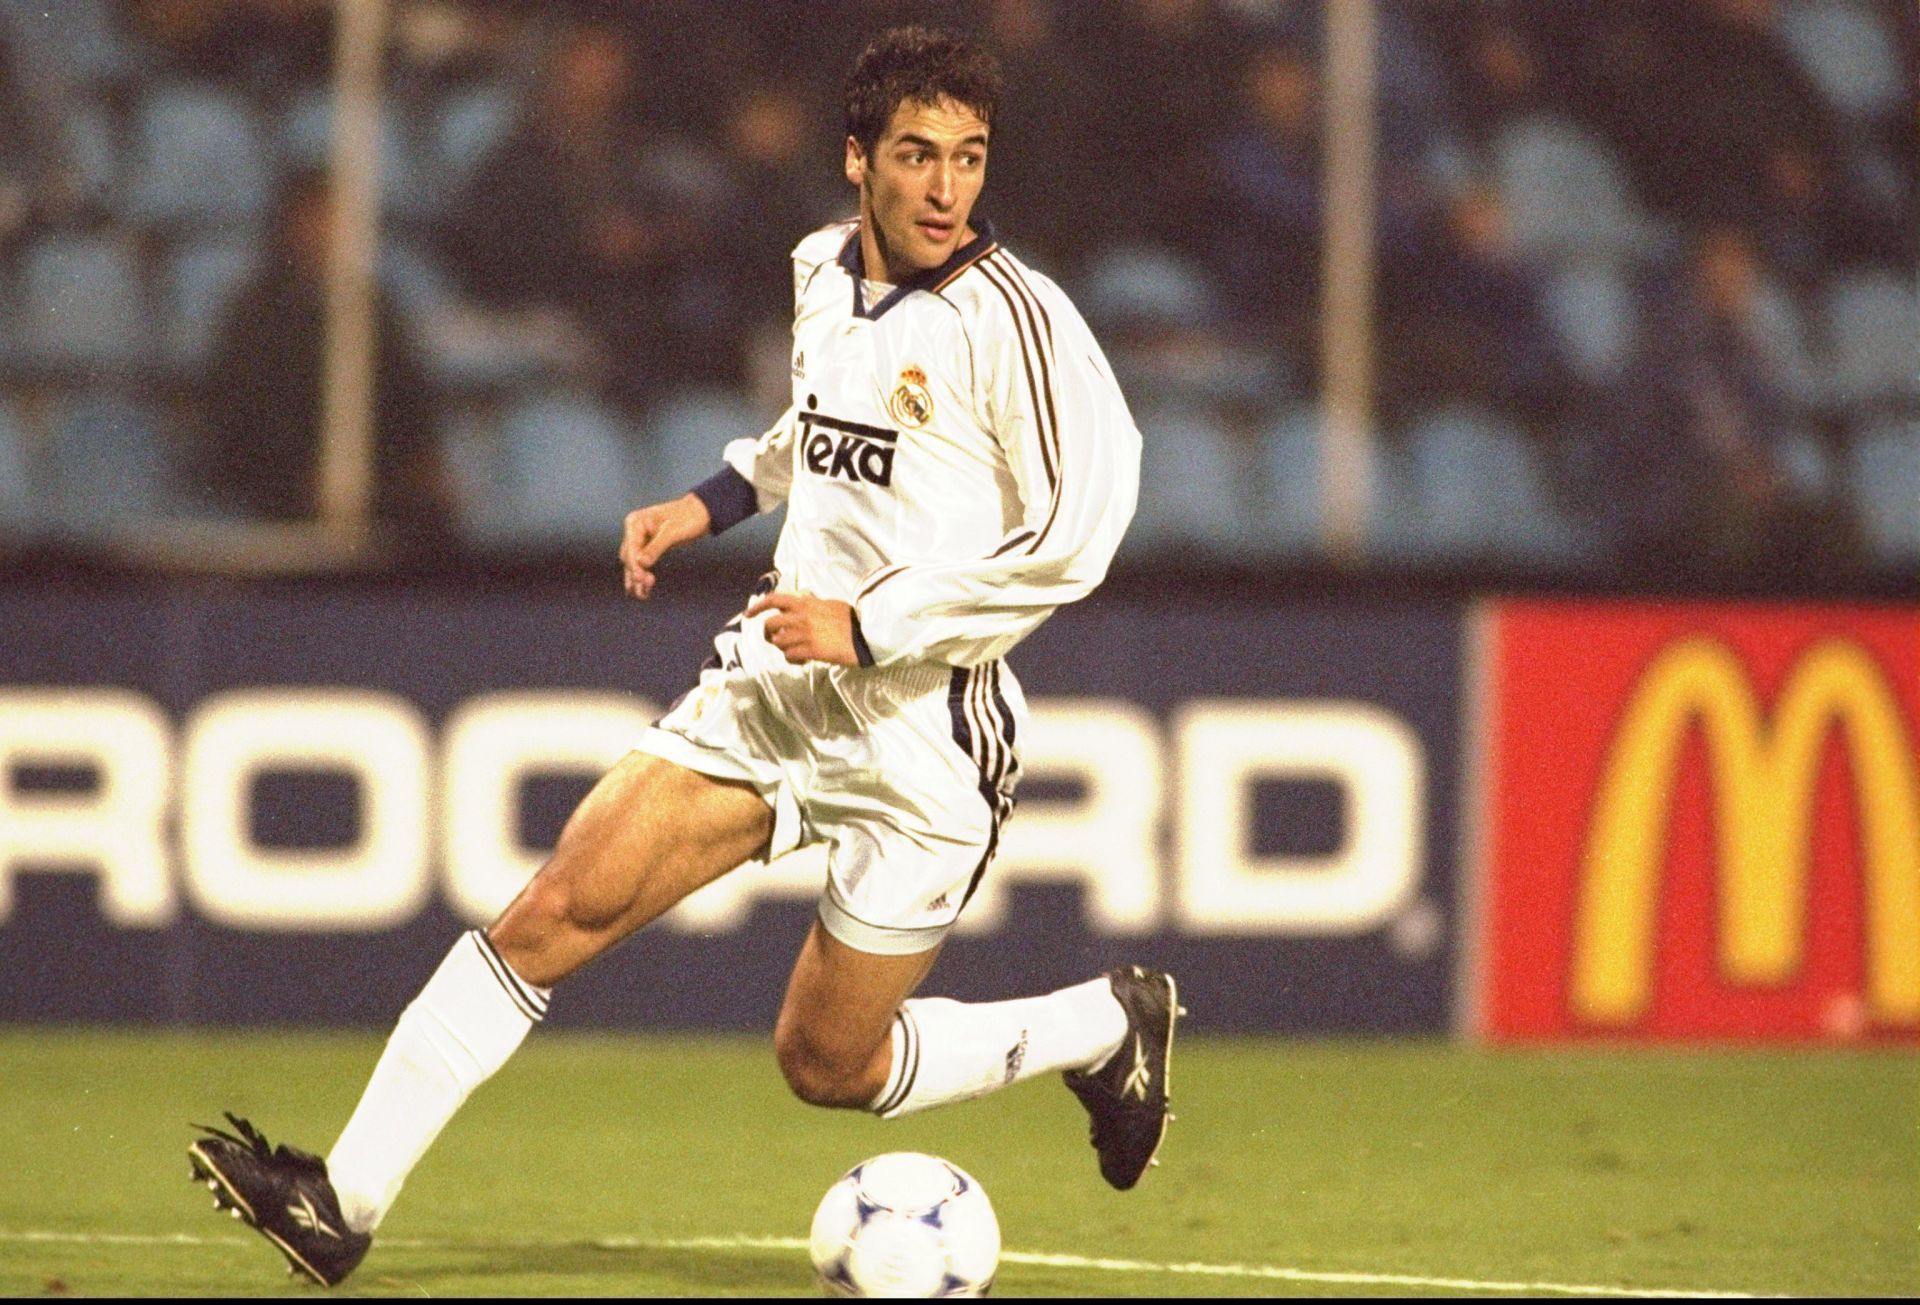 Raul scored over 300 goals for Real Madrid.